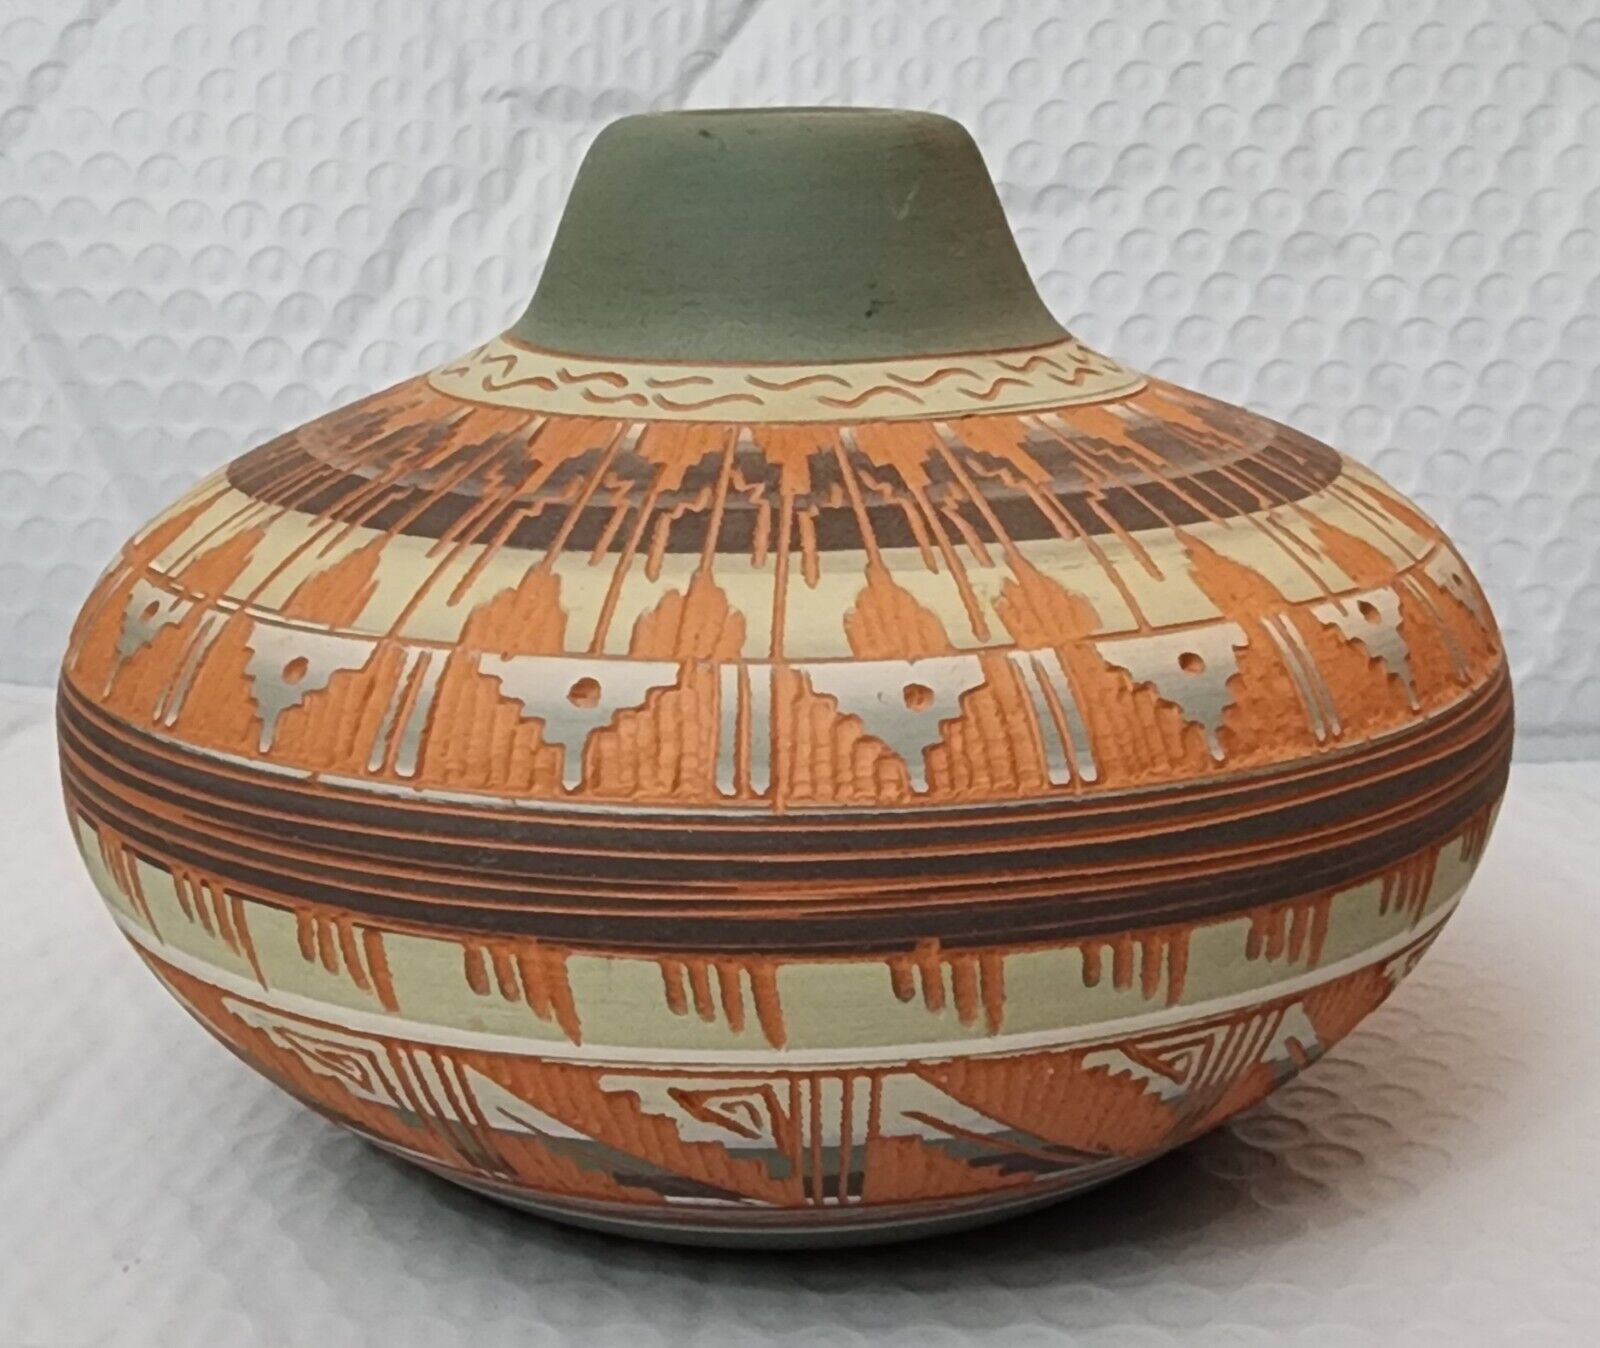 Navajo Exquisite Etched Pottery Vase by Jim Woods (6.5”x 4.75”) 